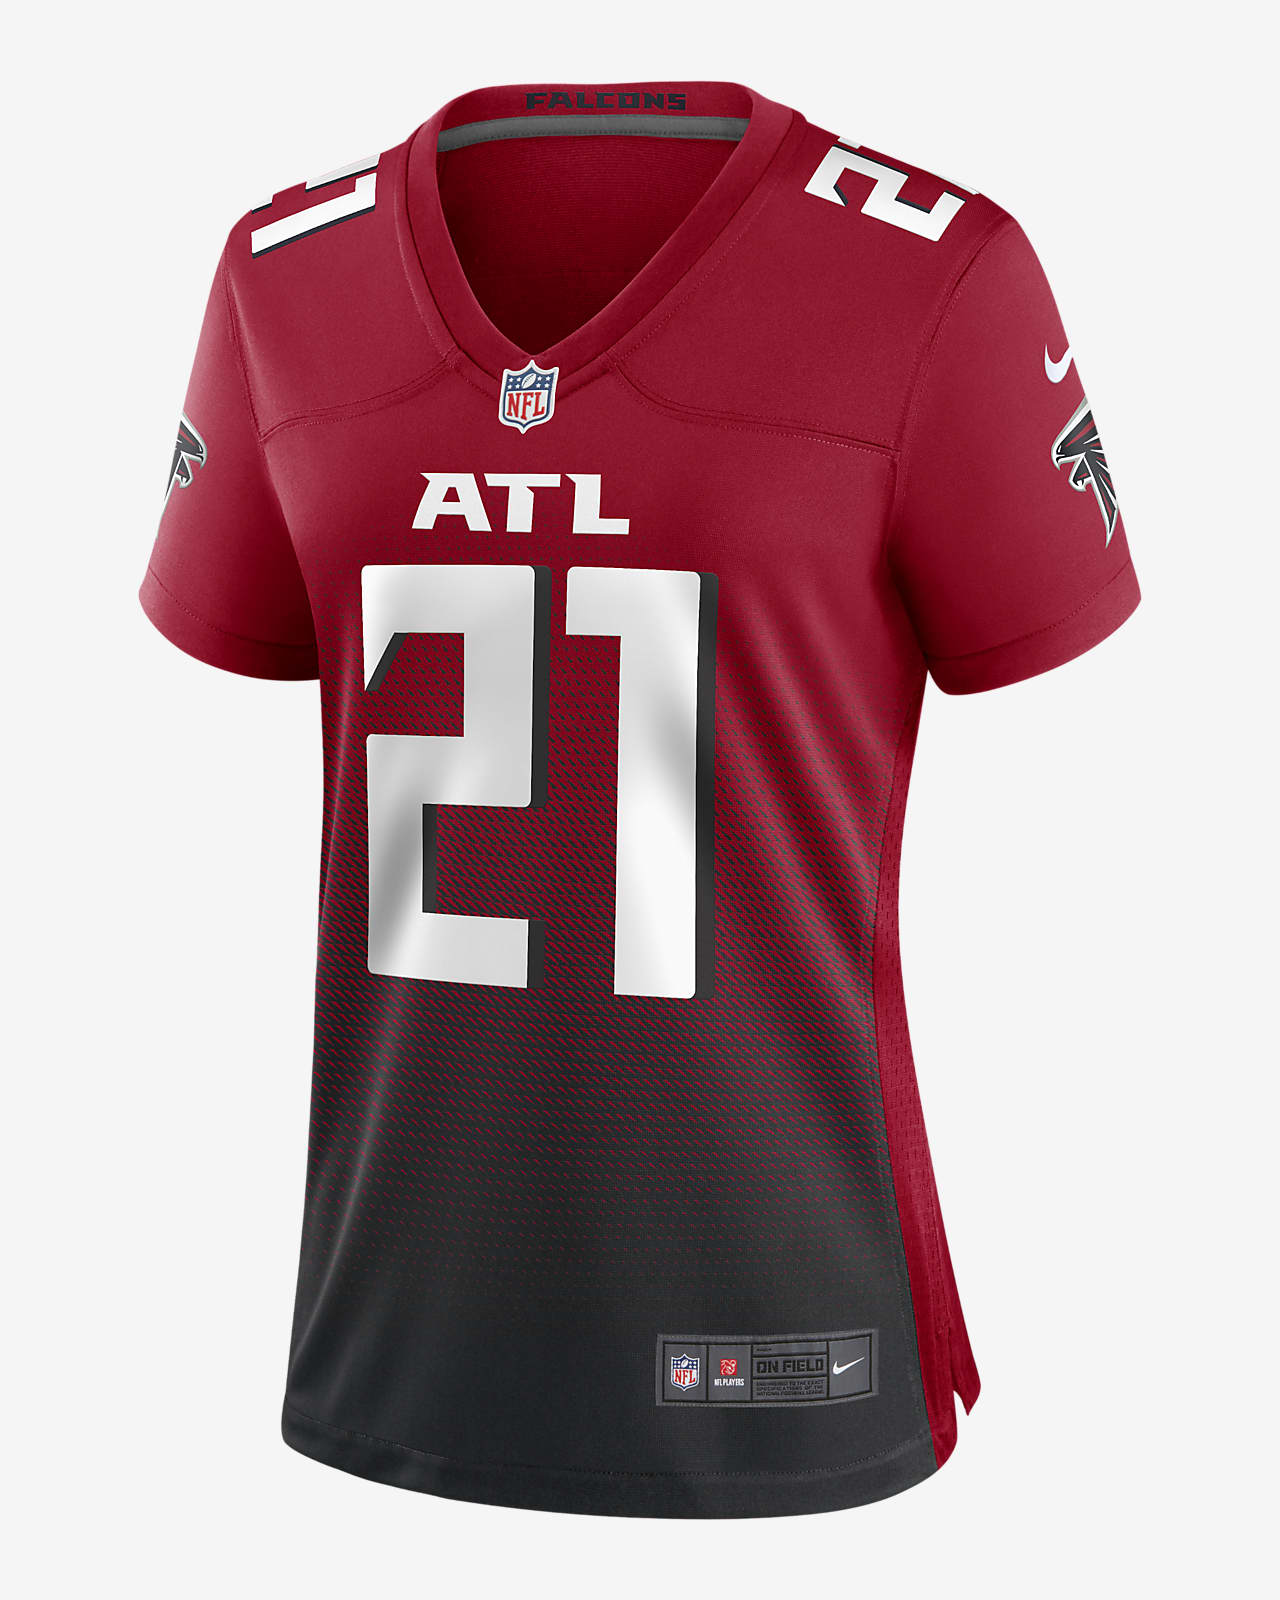 gurley jersey falcons